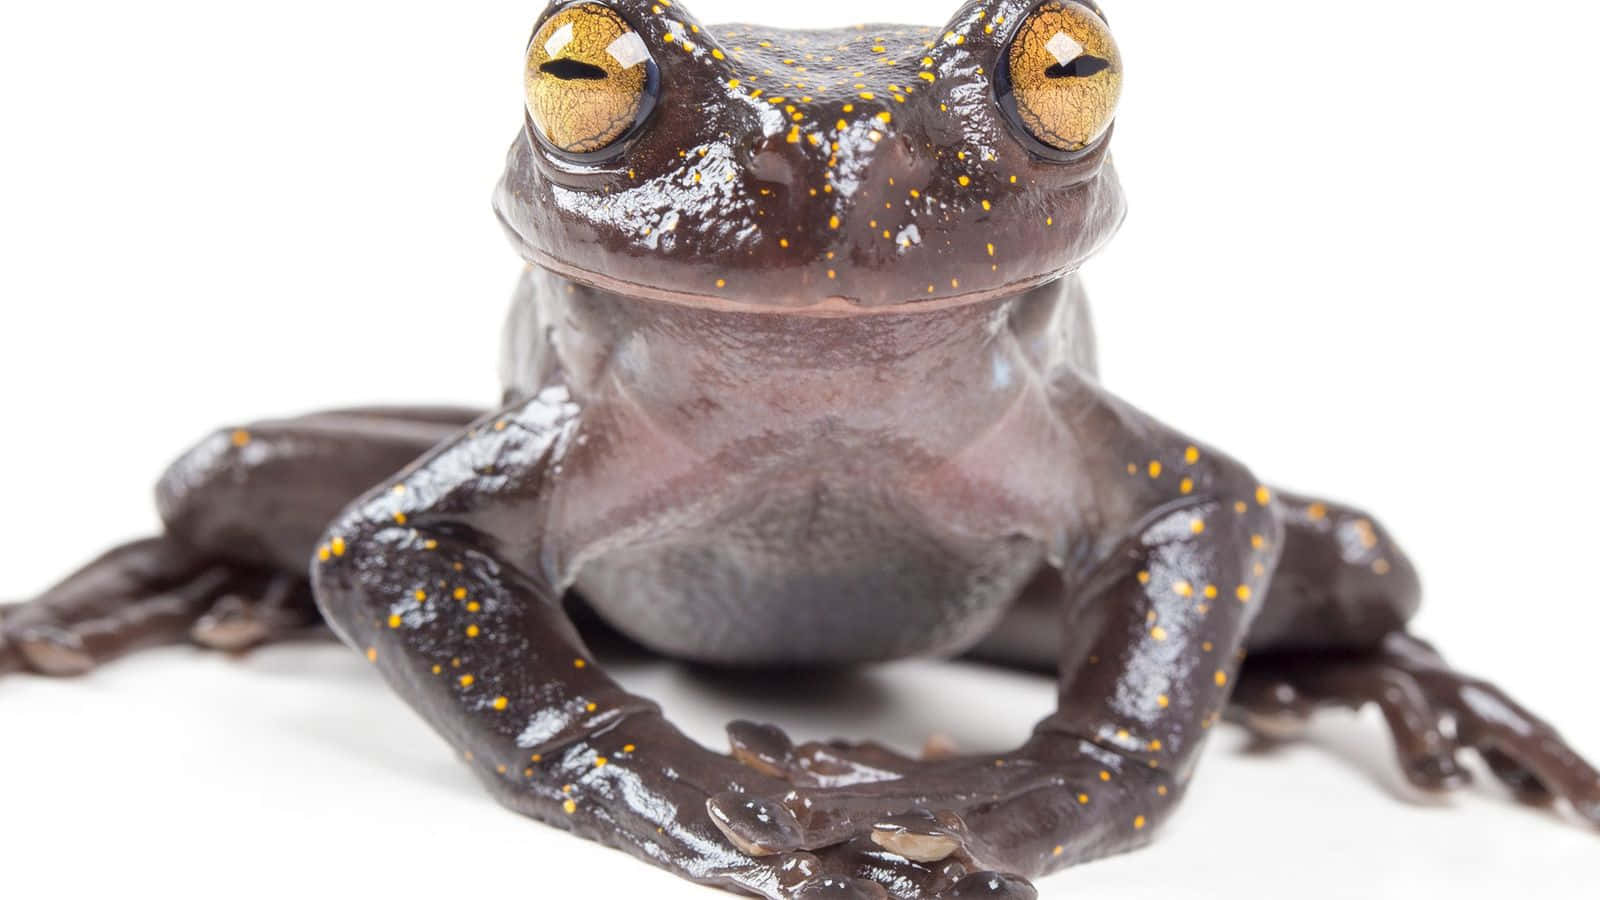 A Black And Yellow Frog Sitting On A White Background